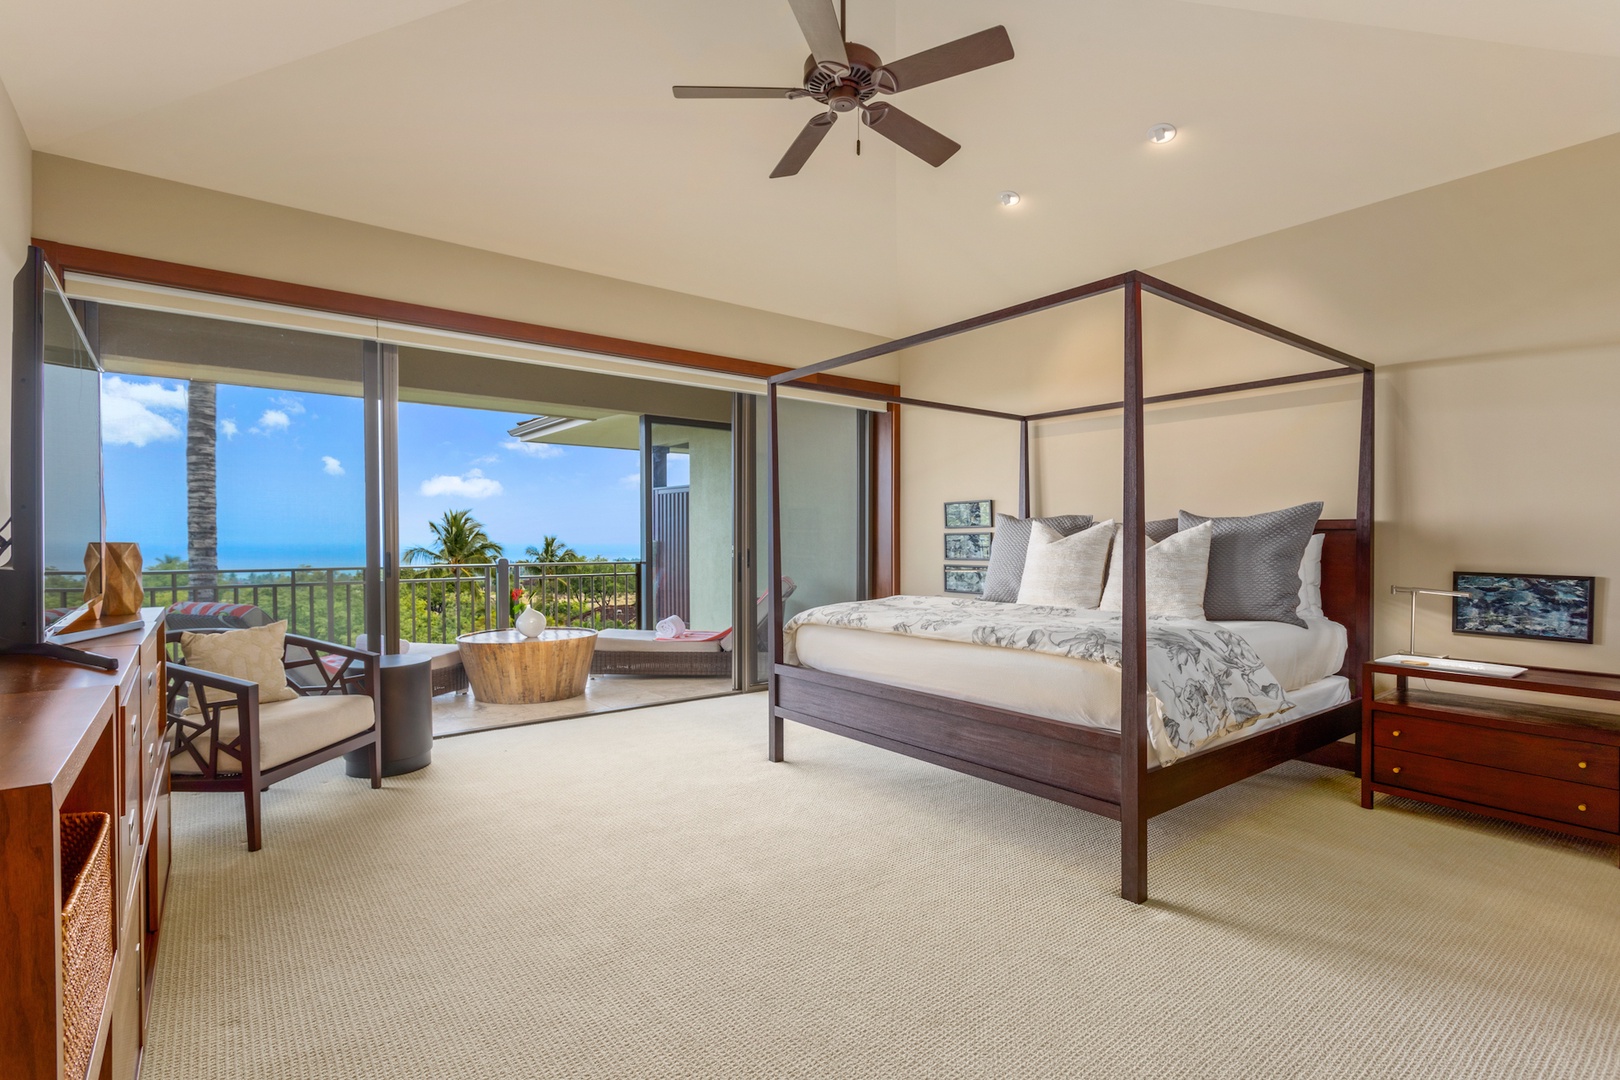 Kailua Kona Vacation Rentals, 3BD Hainoa Villa (2901D) at Four Seasons Resort at Hualalai - Primary suite with private ocean-view deck, king-size bed, large flat-screen TV, and electric drop-down blinds.